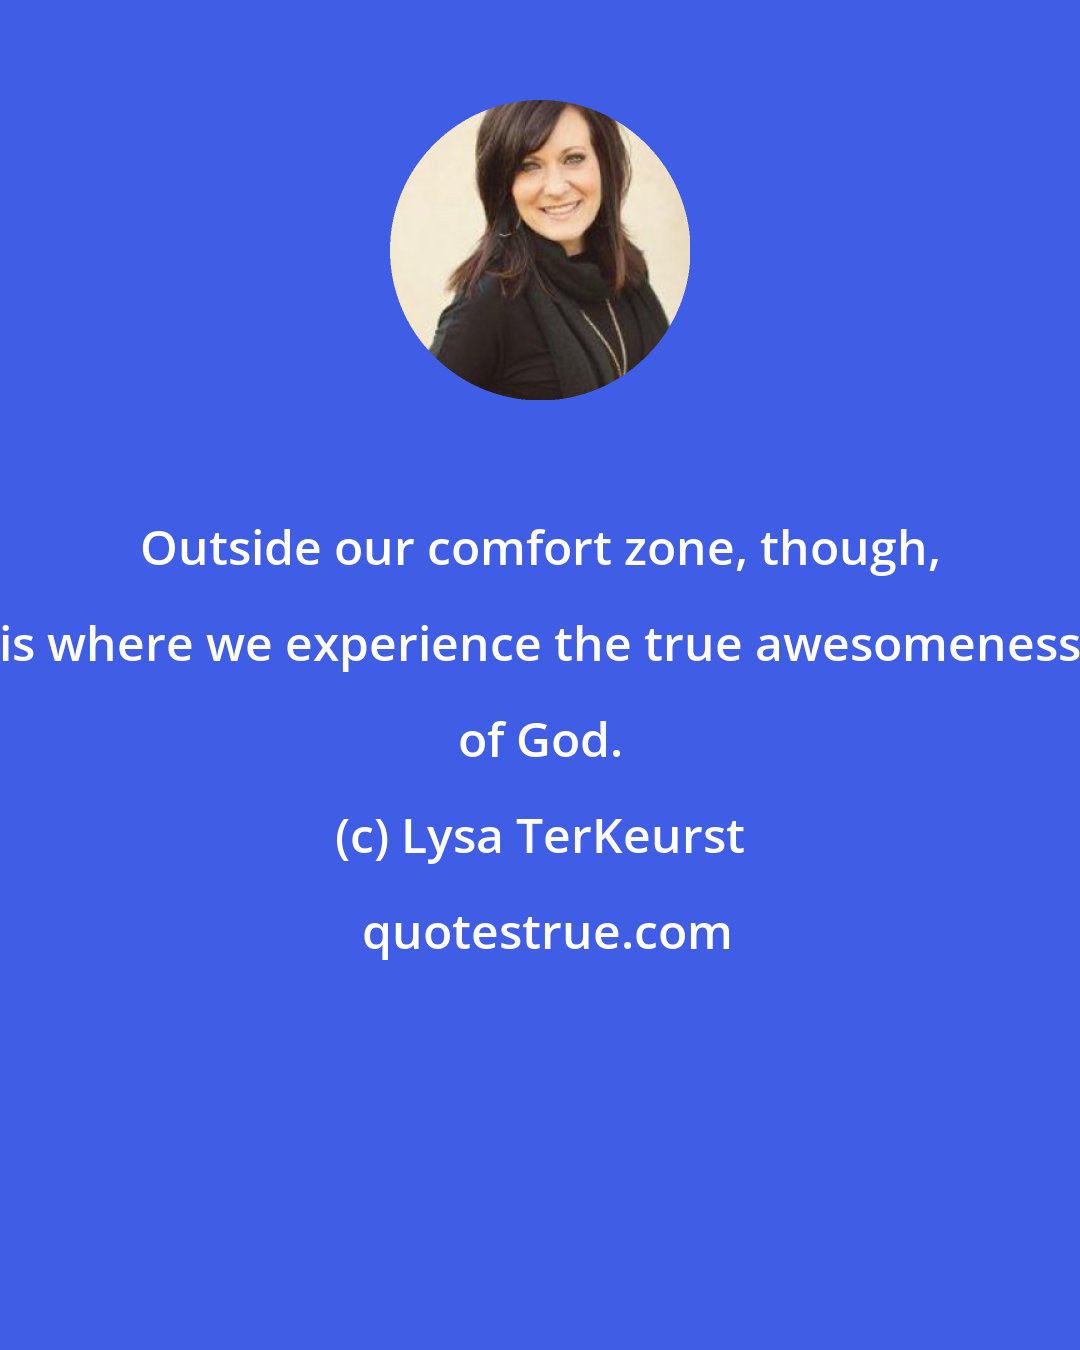 Lysa TerKeurst: Outside our comfort zone, though, is where we experience the true awesomeness of God.